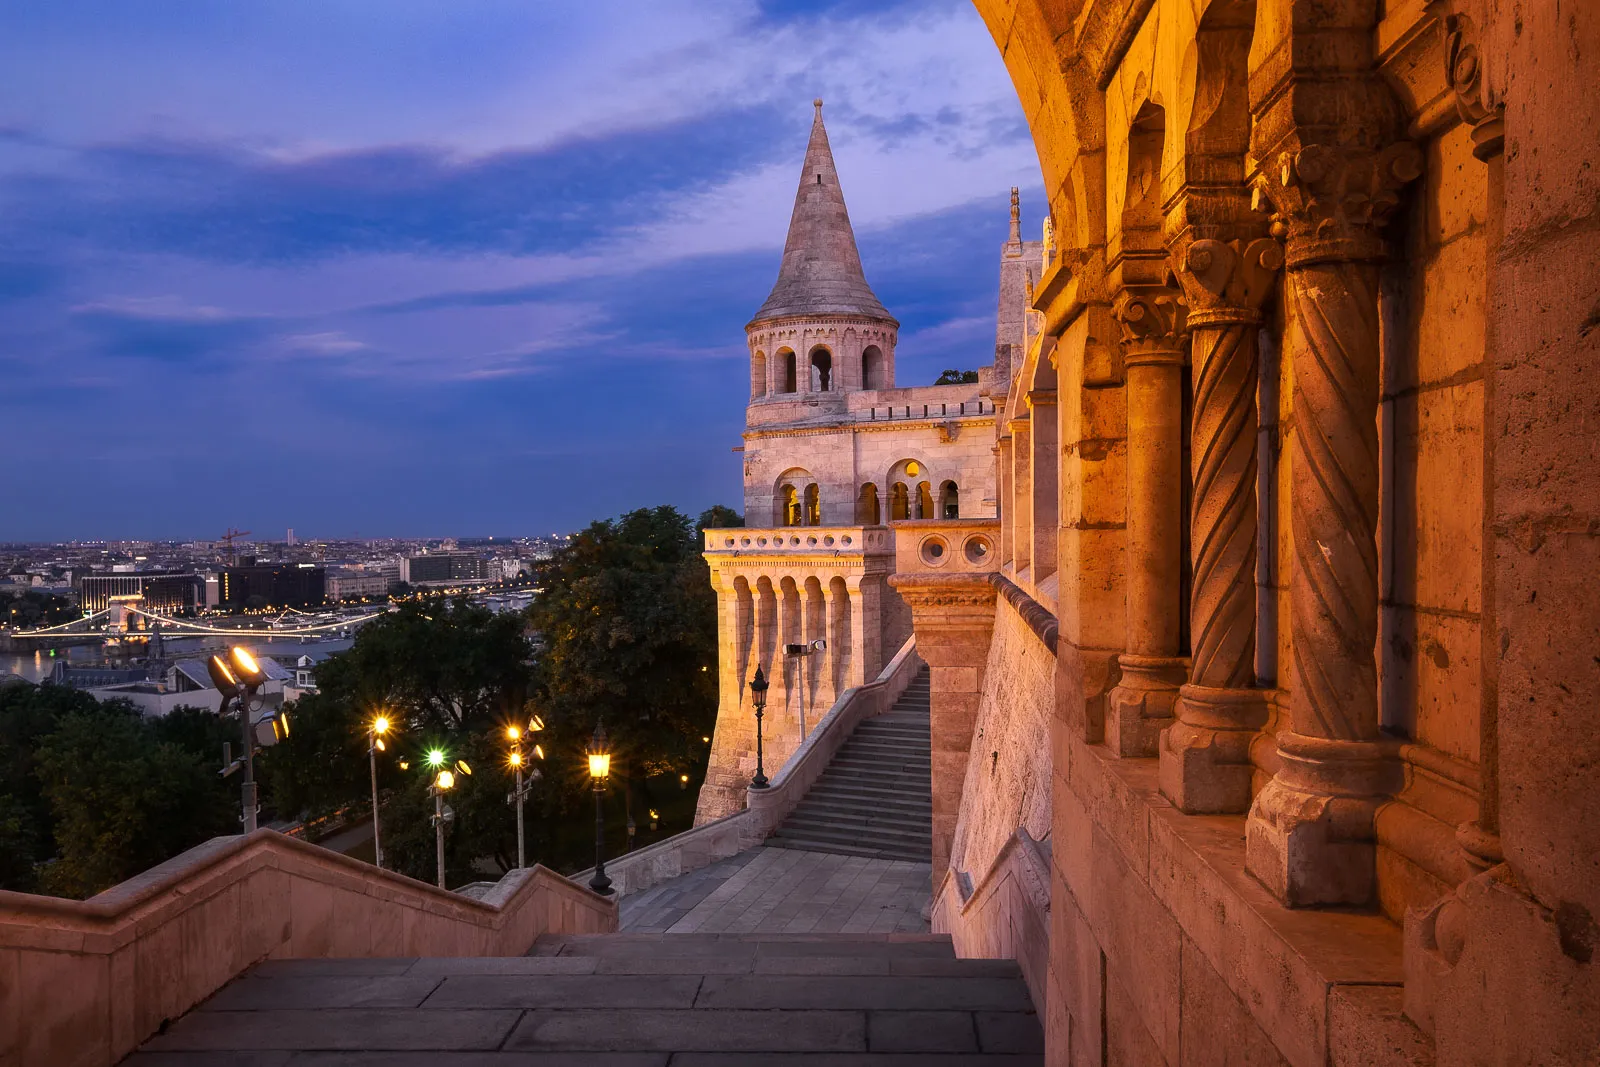 Blue Hour at Fisherman’s Bastion in Budapest. This fairy tale construction stands on the Buda side of the city overlooking the Danube.